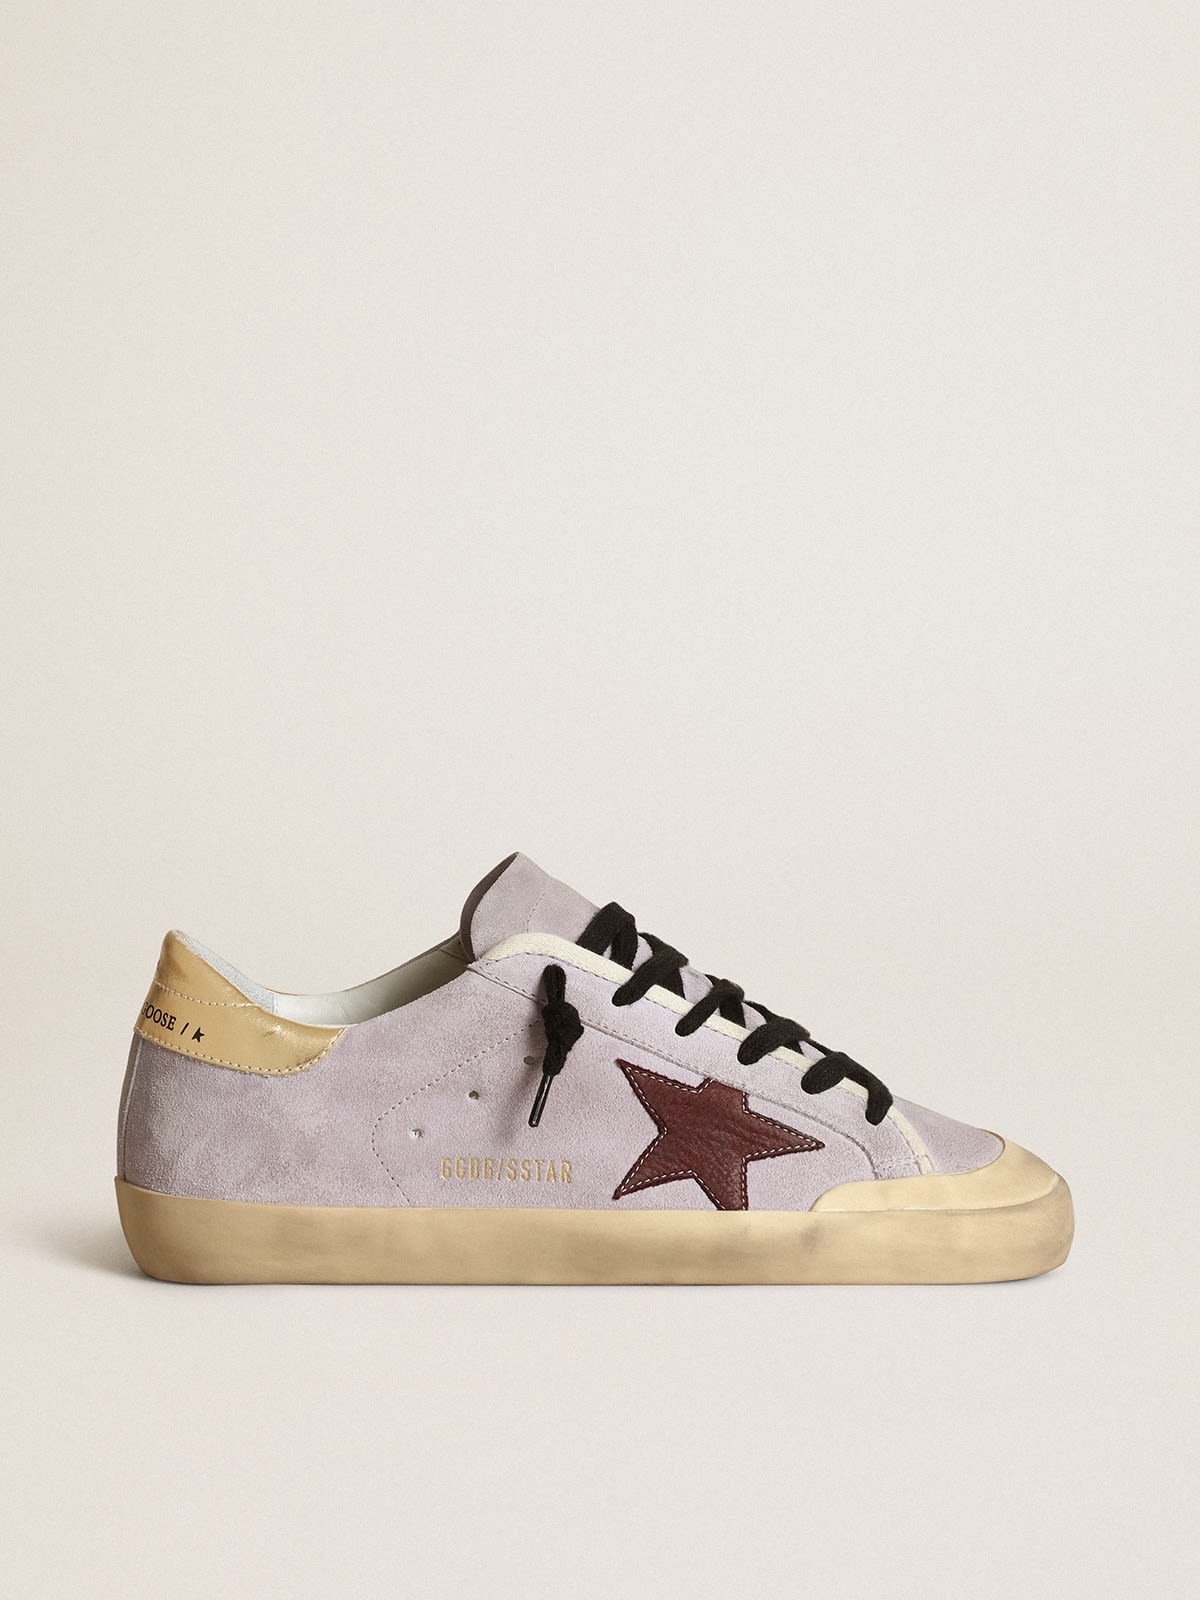 Super-Star in lilac suede with a brown star and gold heel tab - 1